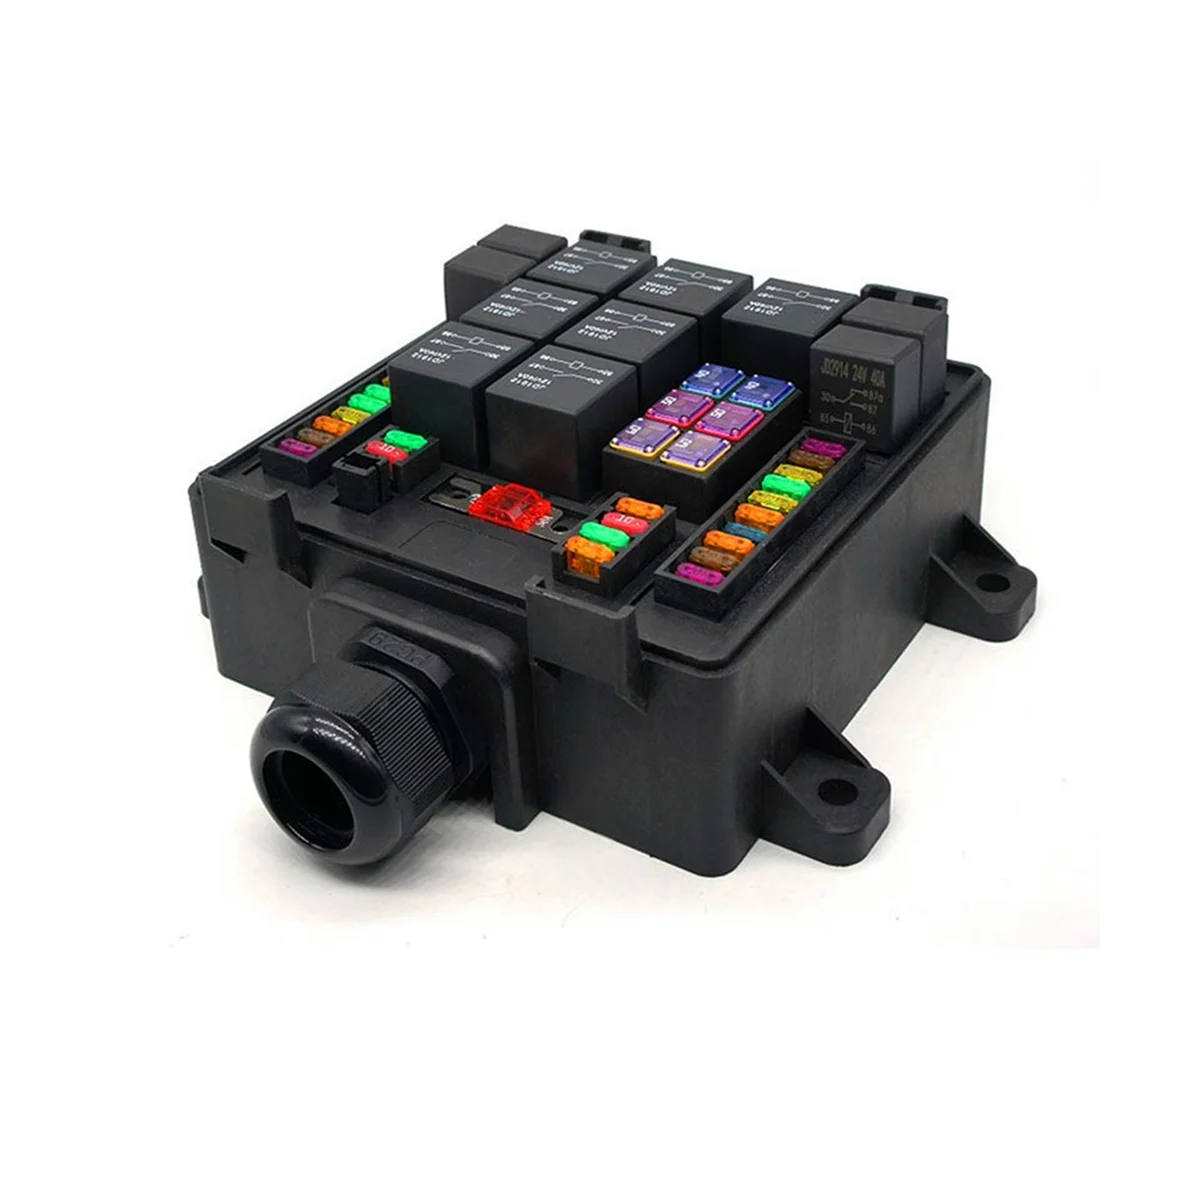 

12V 40A Car Waterproof Safety Box Relay Safety Box Control Relay Modification Vehicle Control the Safety Box 24V 4P